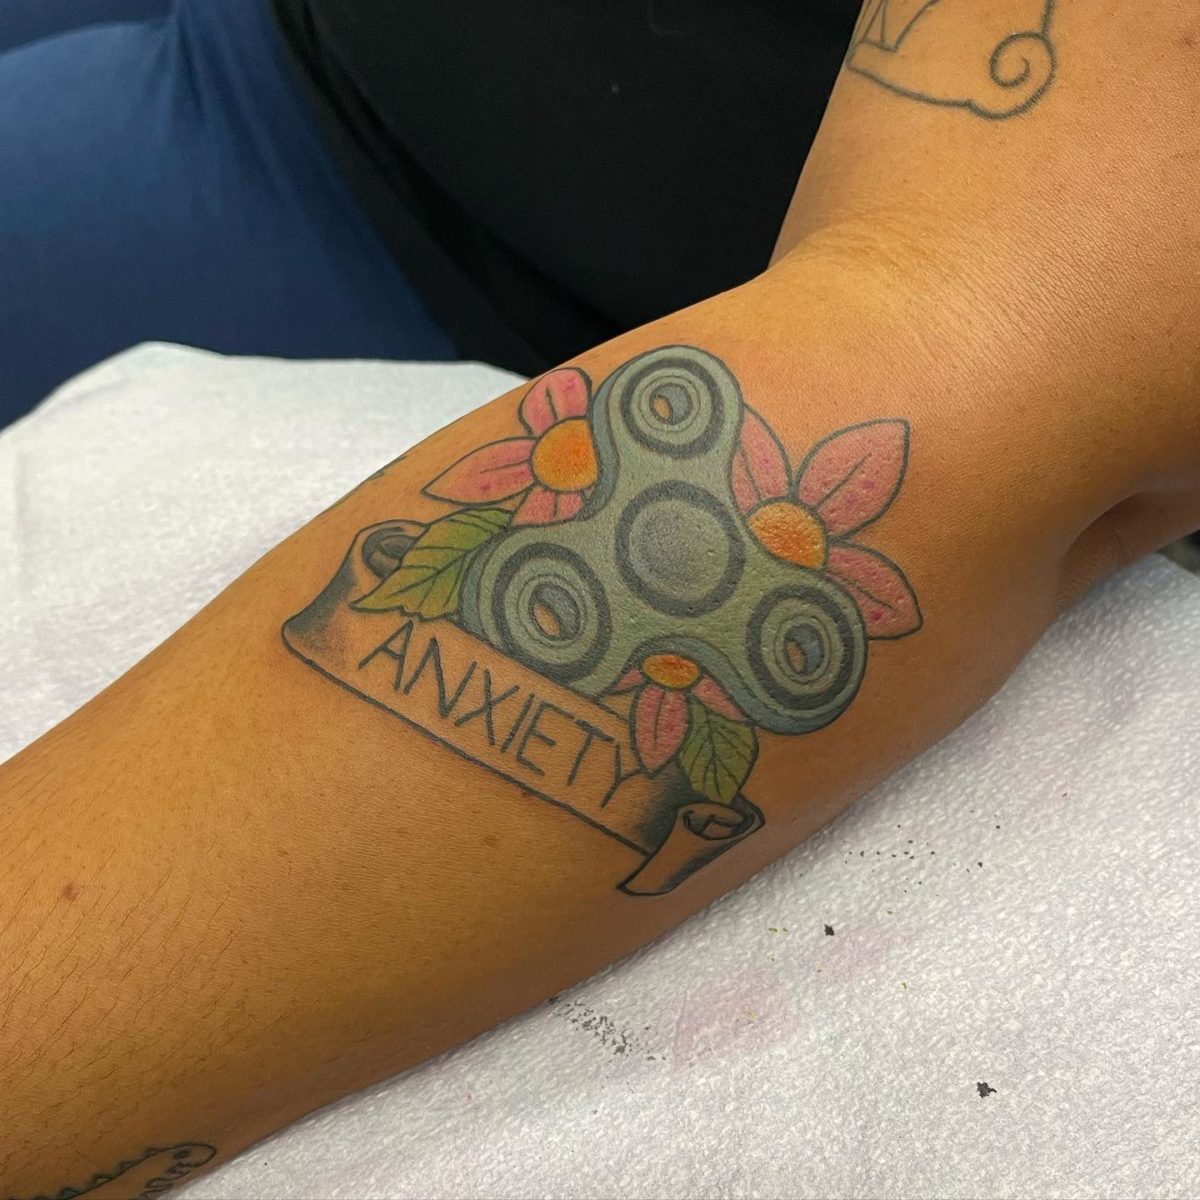 30+ meaningful anxiety tattoos that illustrate the invisible struggle | get inspired by these anxiety tattoos that will make you feel less alone.